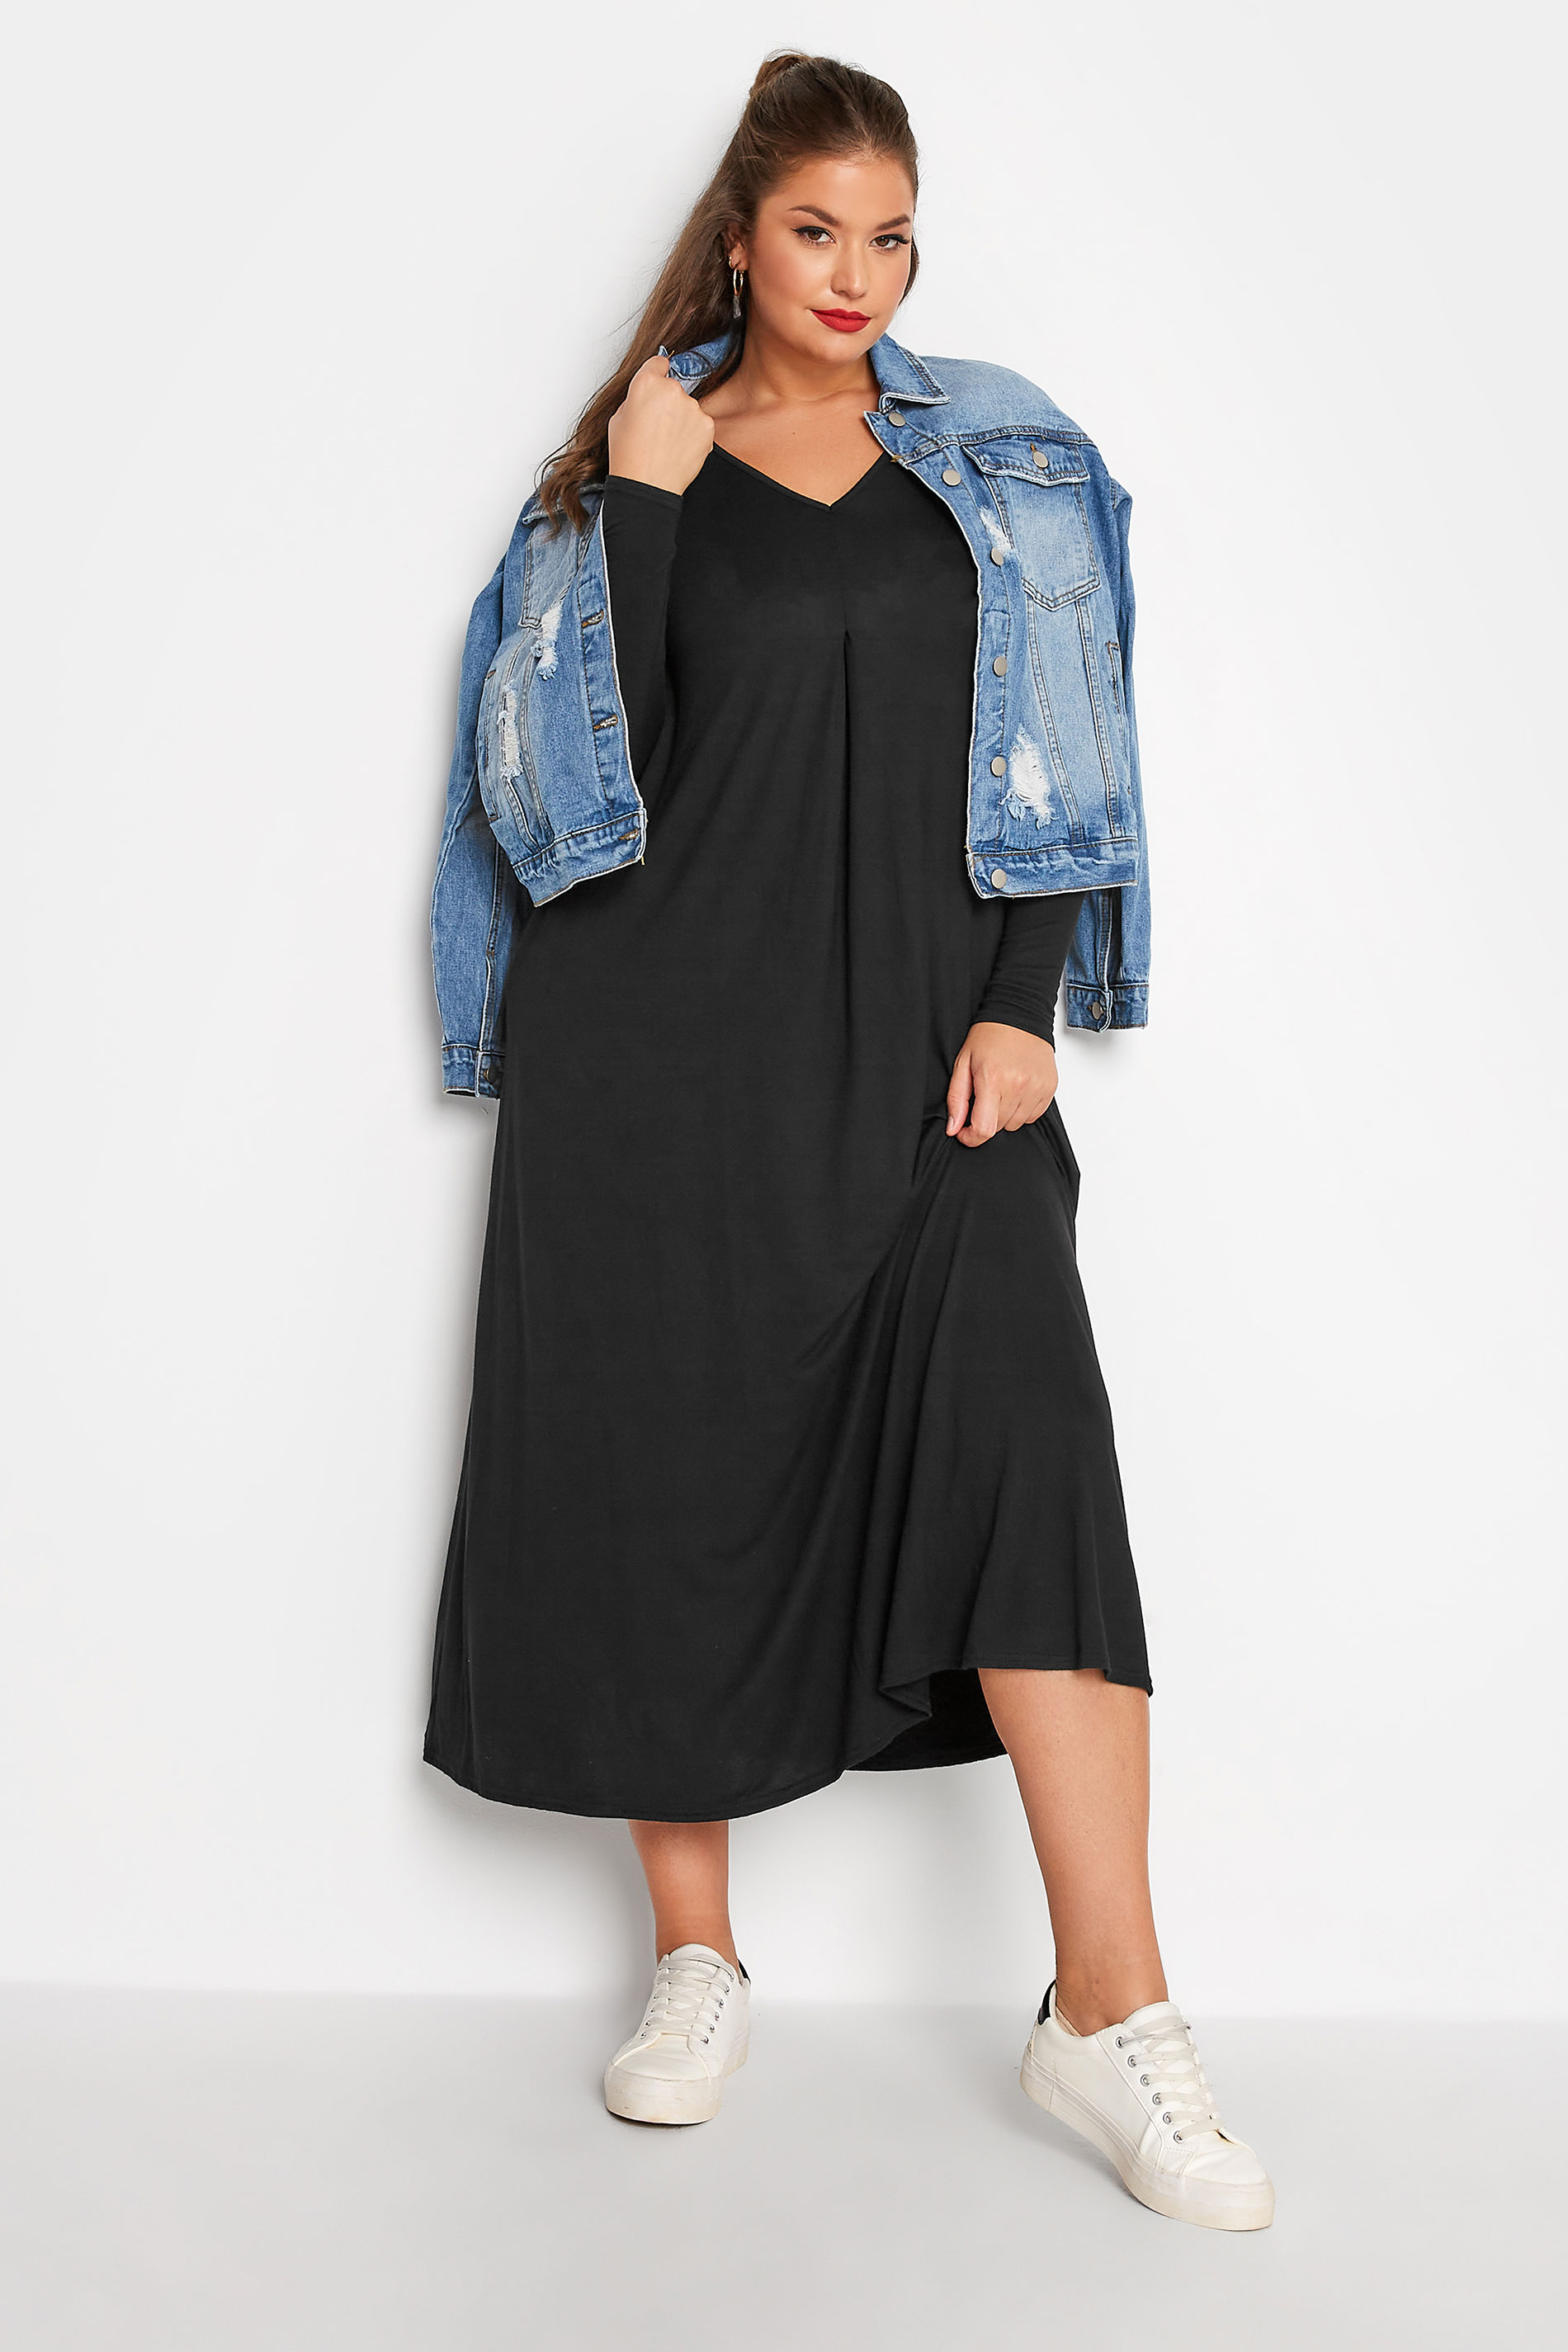 LIMITED COLLECTION Plus Size Black Pleat Front Dress | Yours Clothing 1